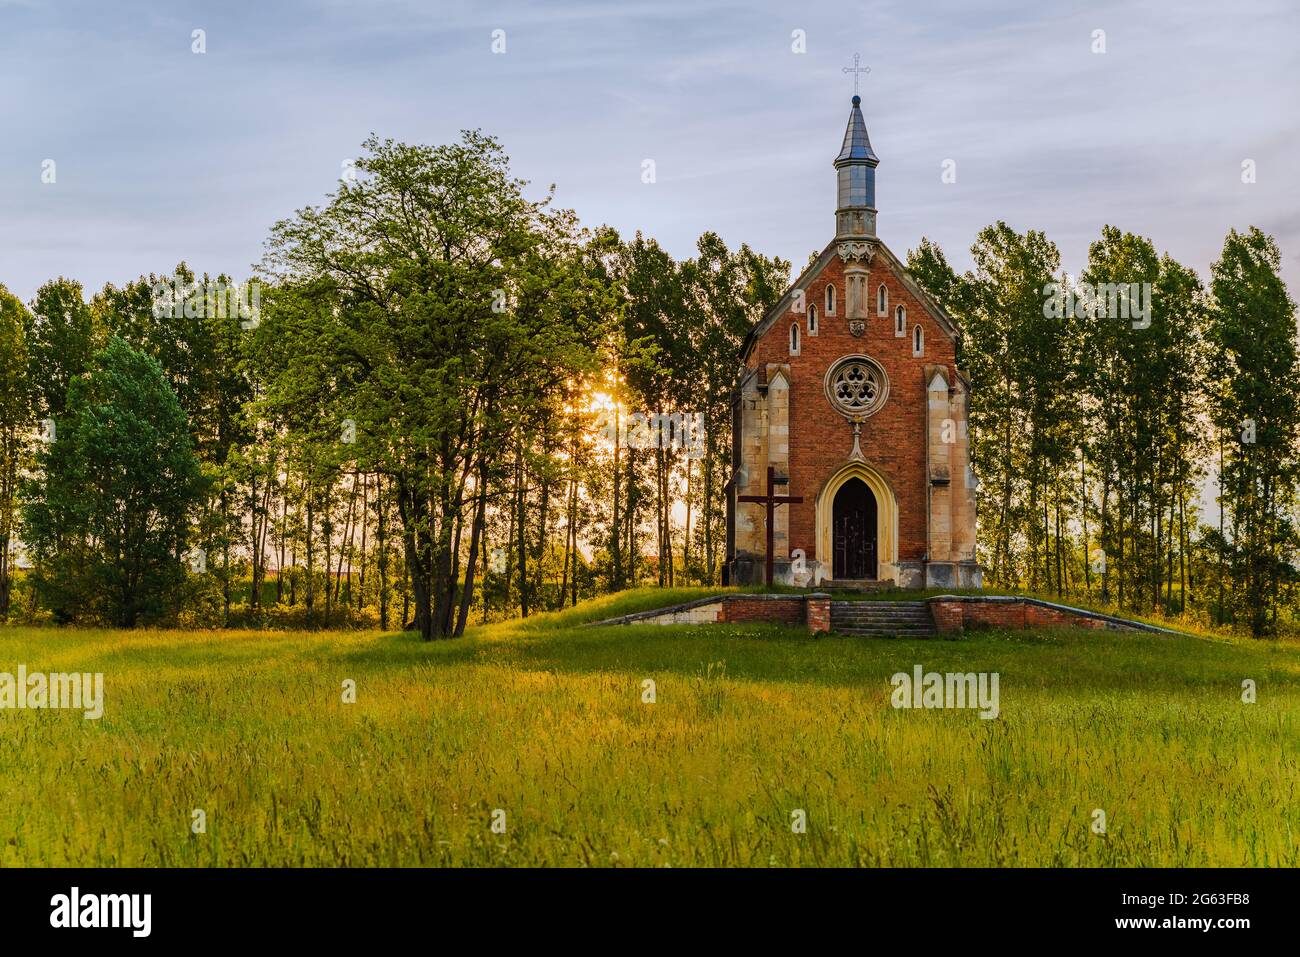 Zichy chapel in Lorev village Hungary. This is a memorial place for Jeno Zichy who was executed after the revolution of 1848 here. built in 1858 by ne Stock Photo